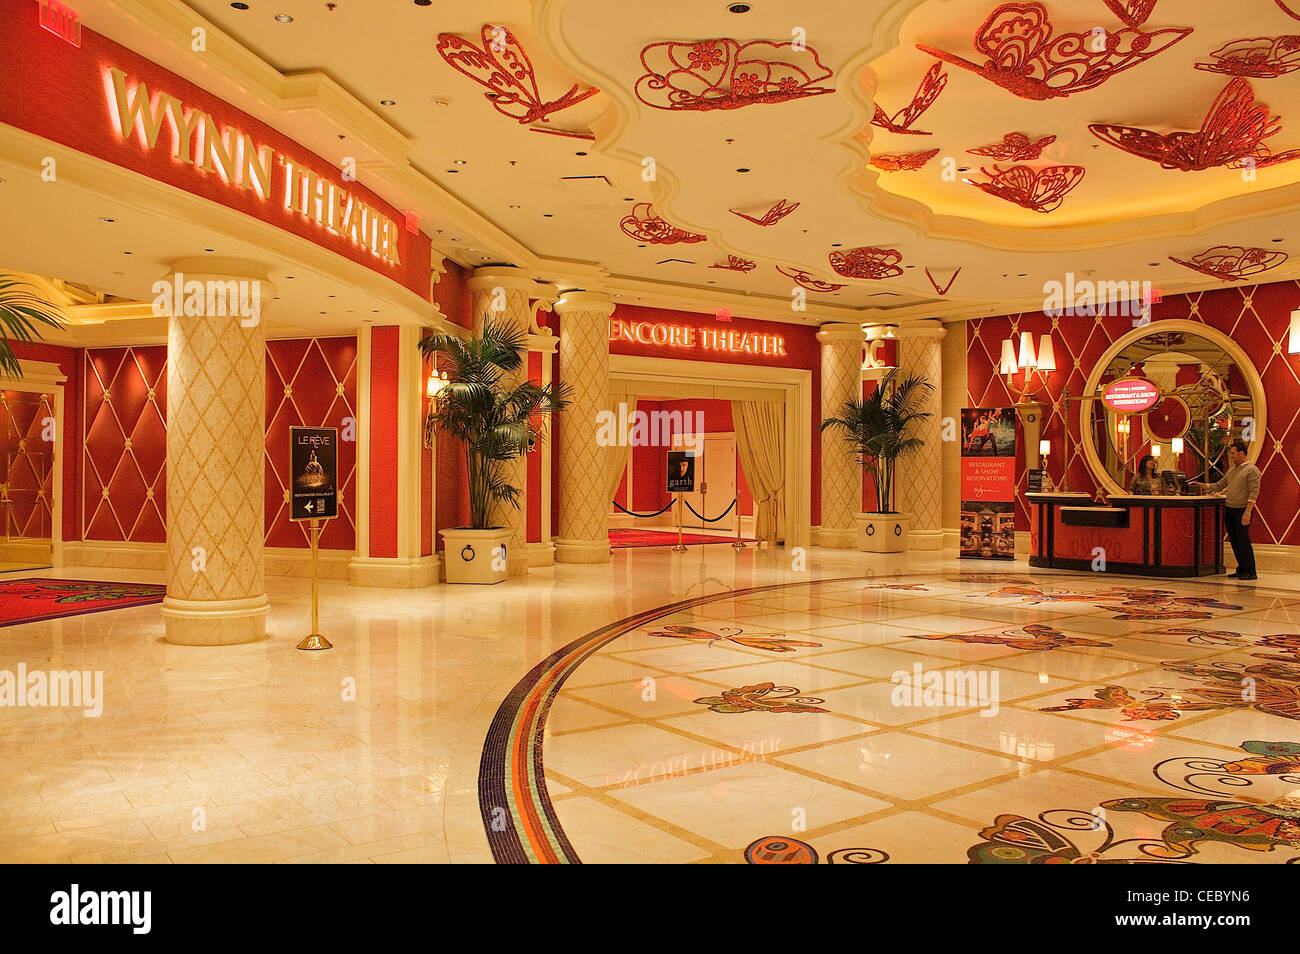 Entrances to the Wynn and Encore theaters, Las Vegas, Nevada, United States Stock Photo